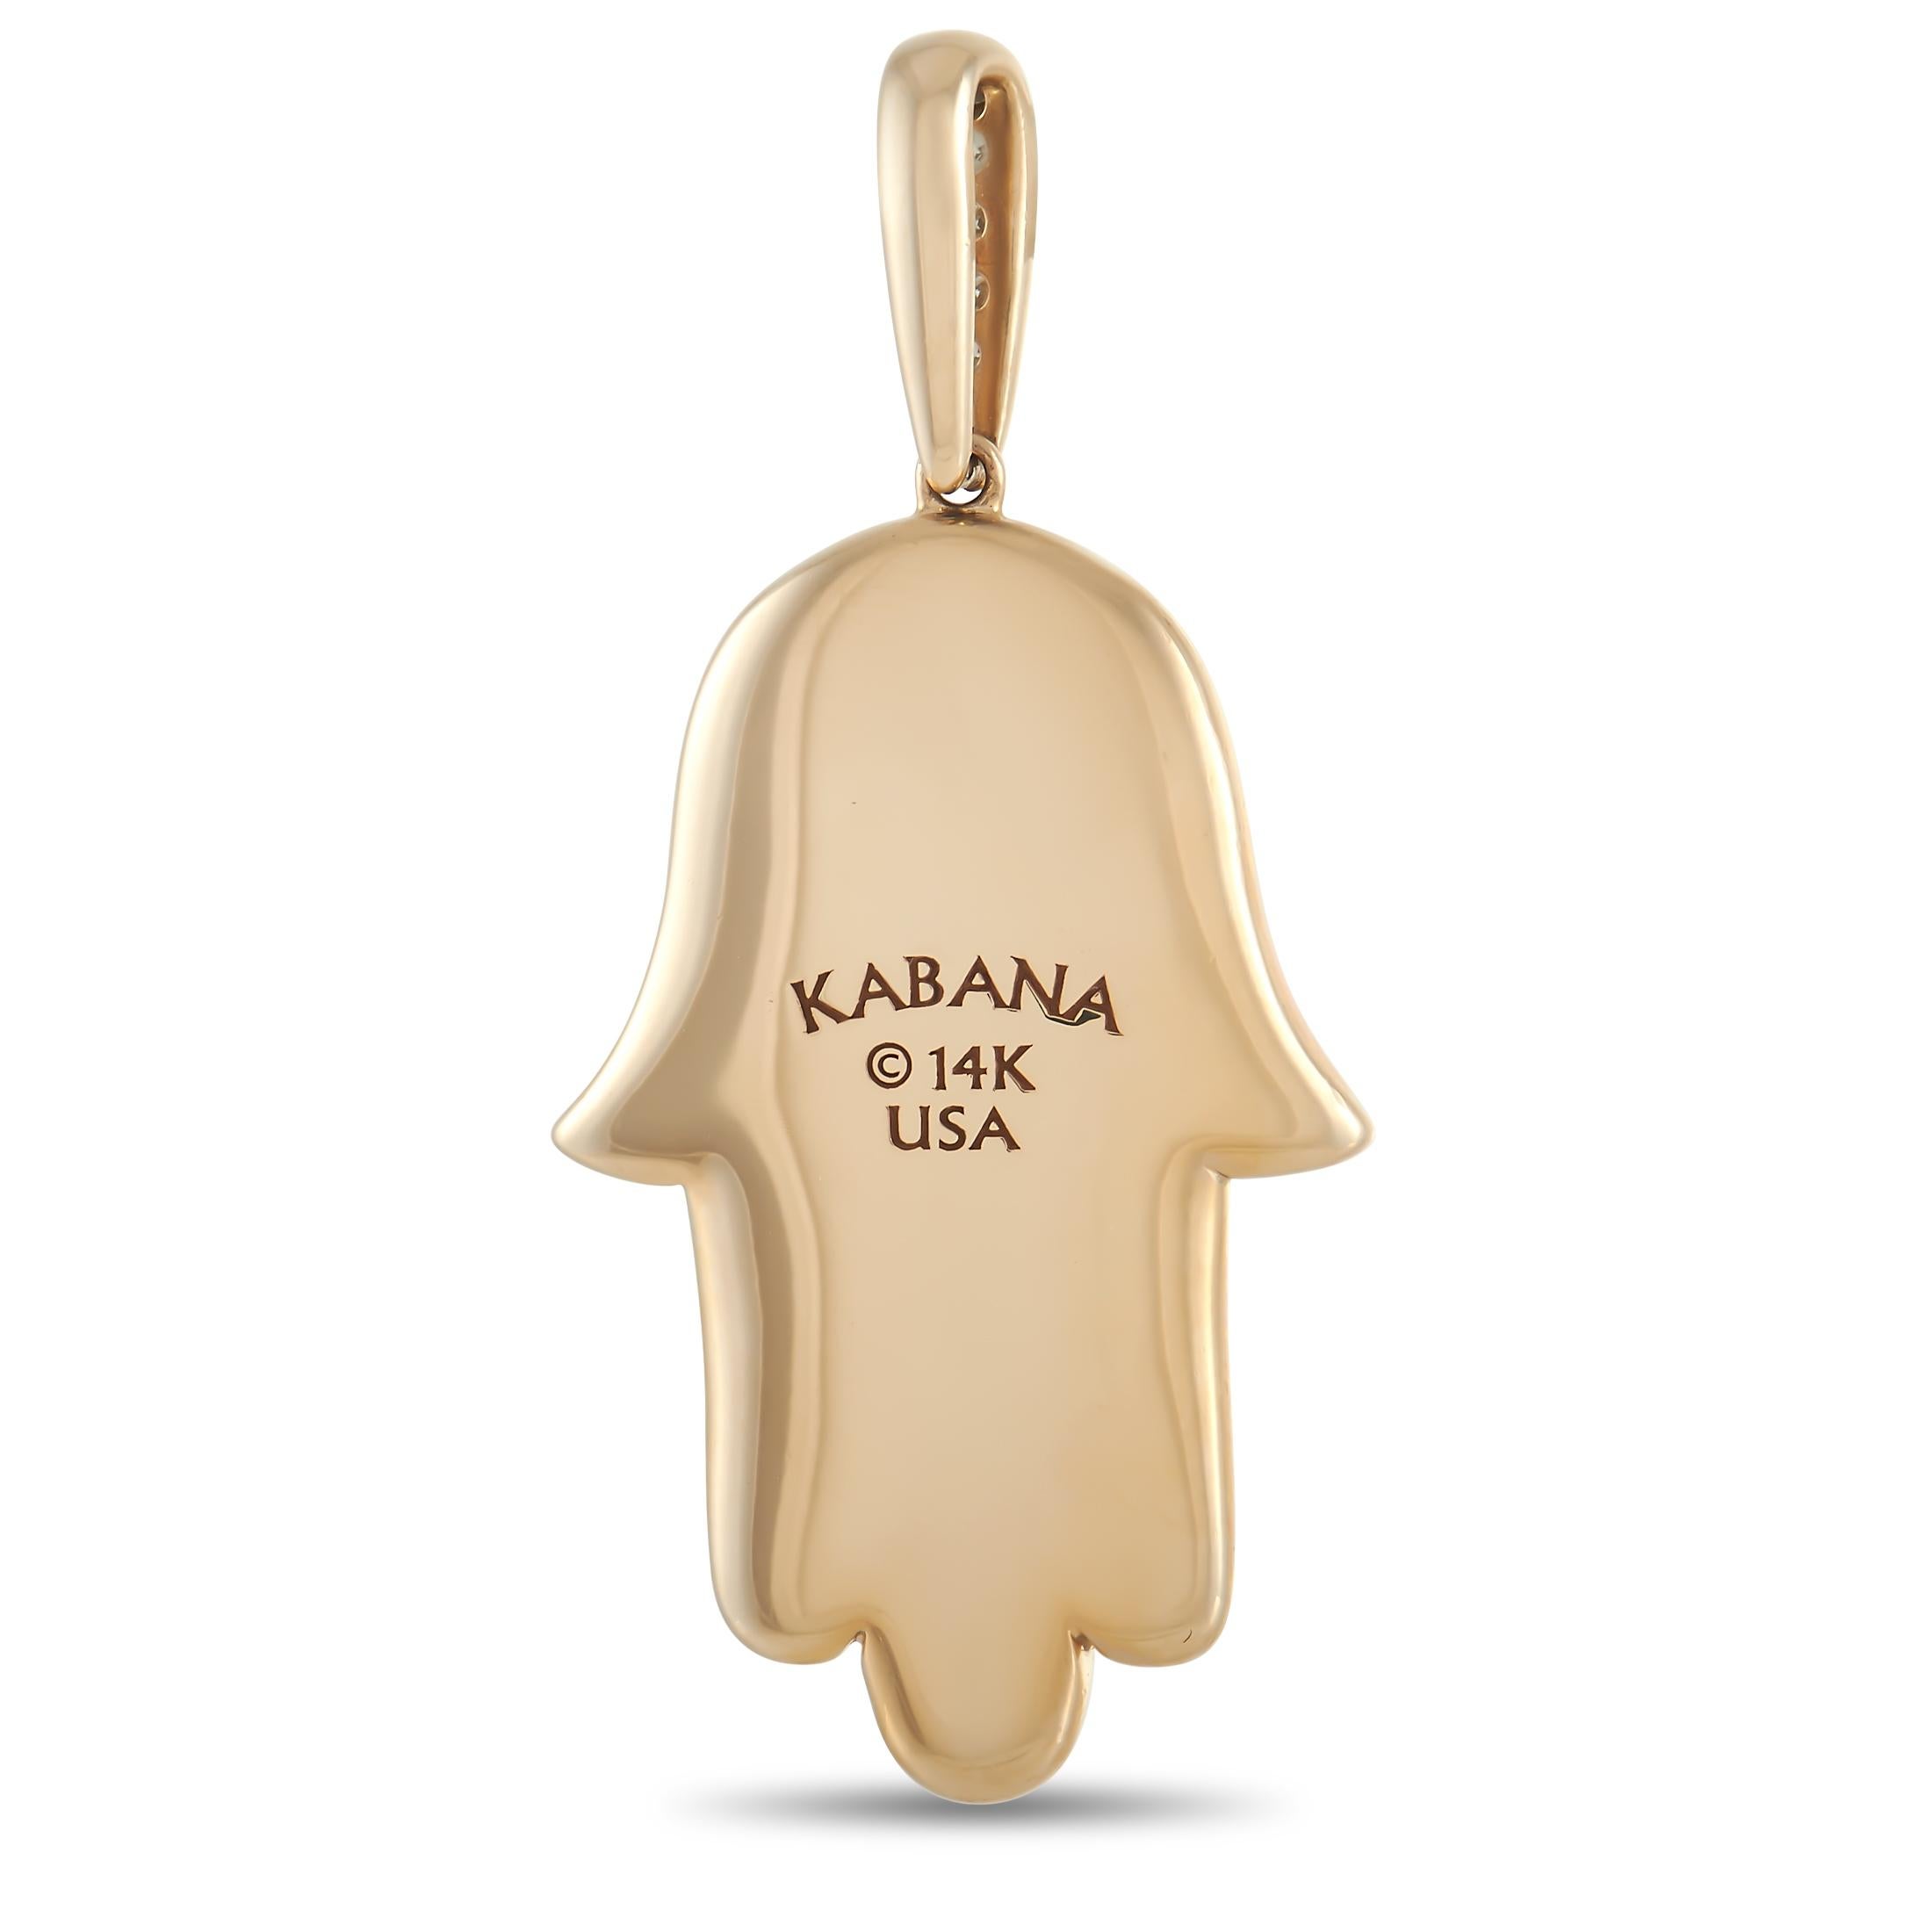 Add luxury to your wardrobe with this elegant Hamsa pendant from Kabana. This timeless symbol comes to life thanks a beautiful combination of 14K Yellow Gold, scarlet red Spiny, and diamonds totaling 0.33 carats. It measures 1.75” long and .75” wide